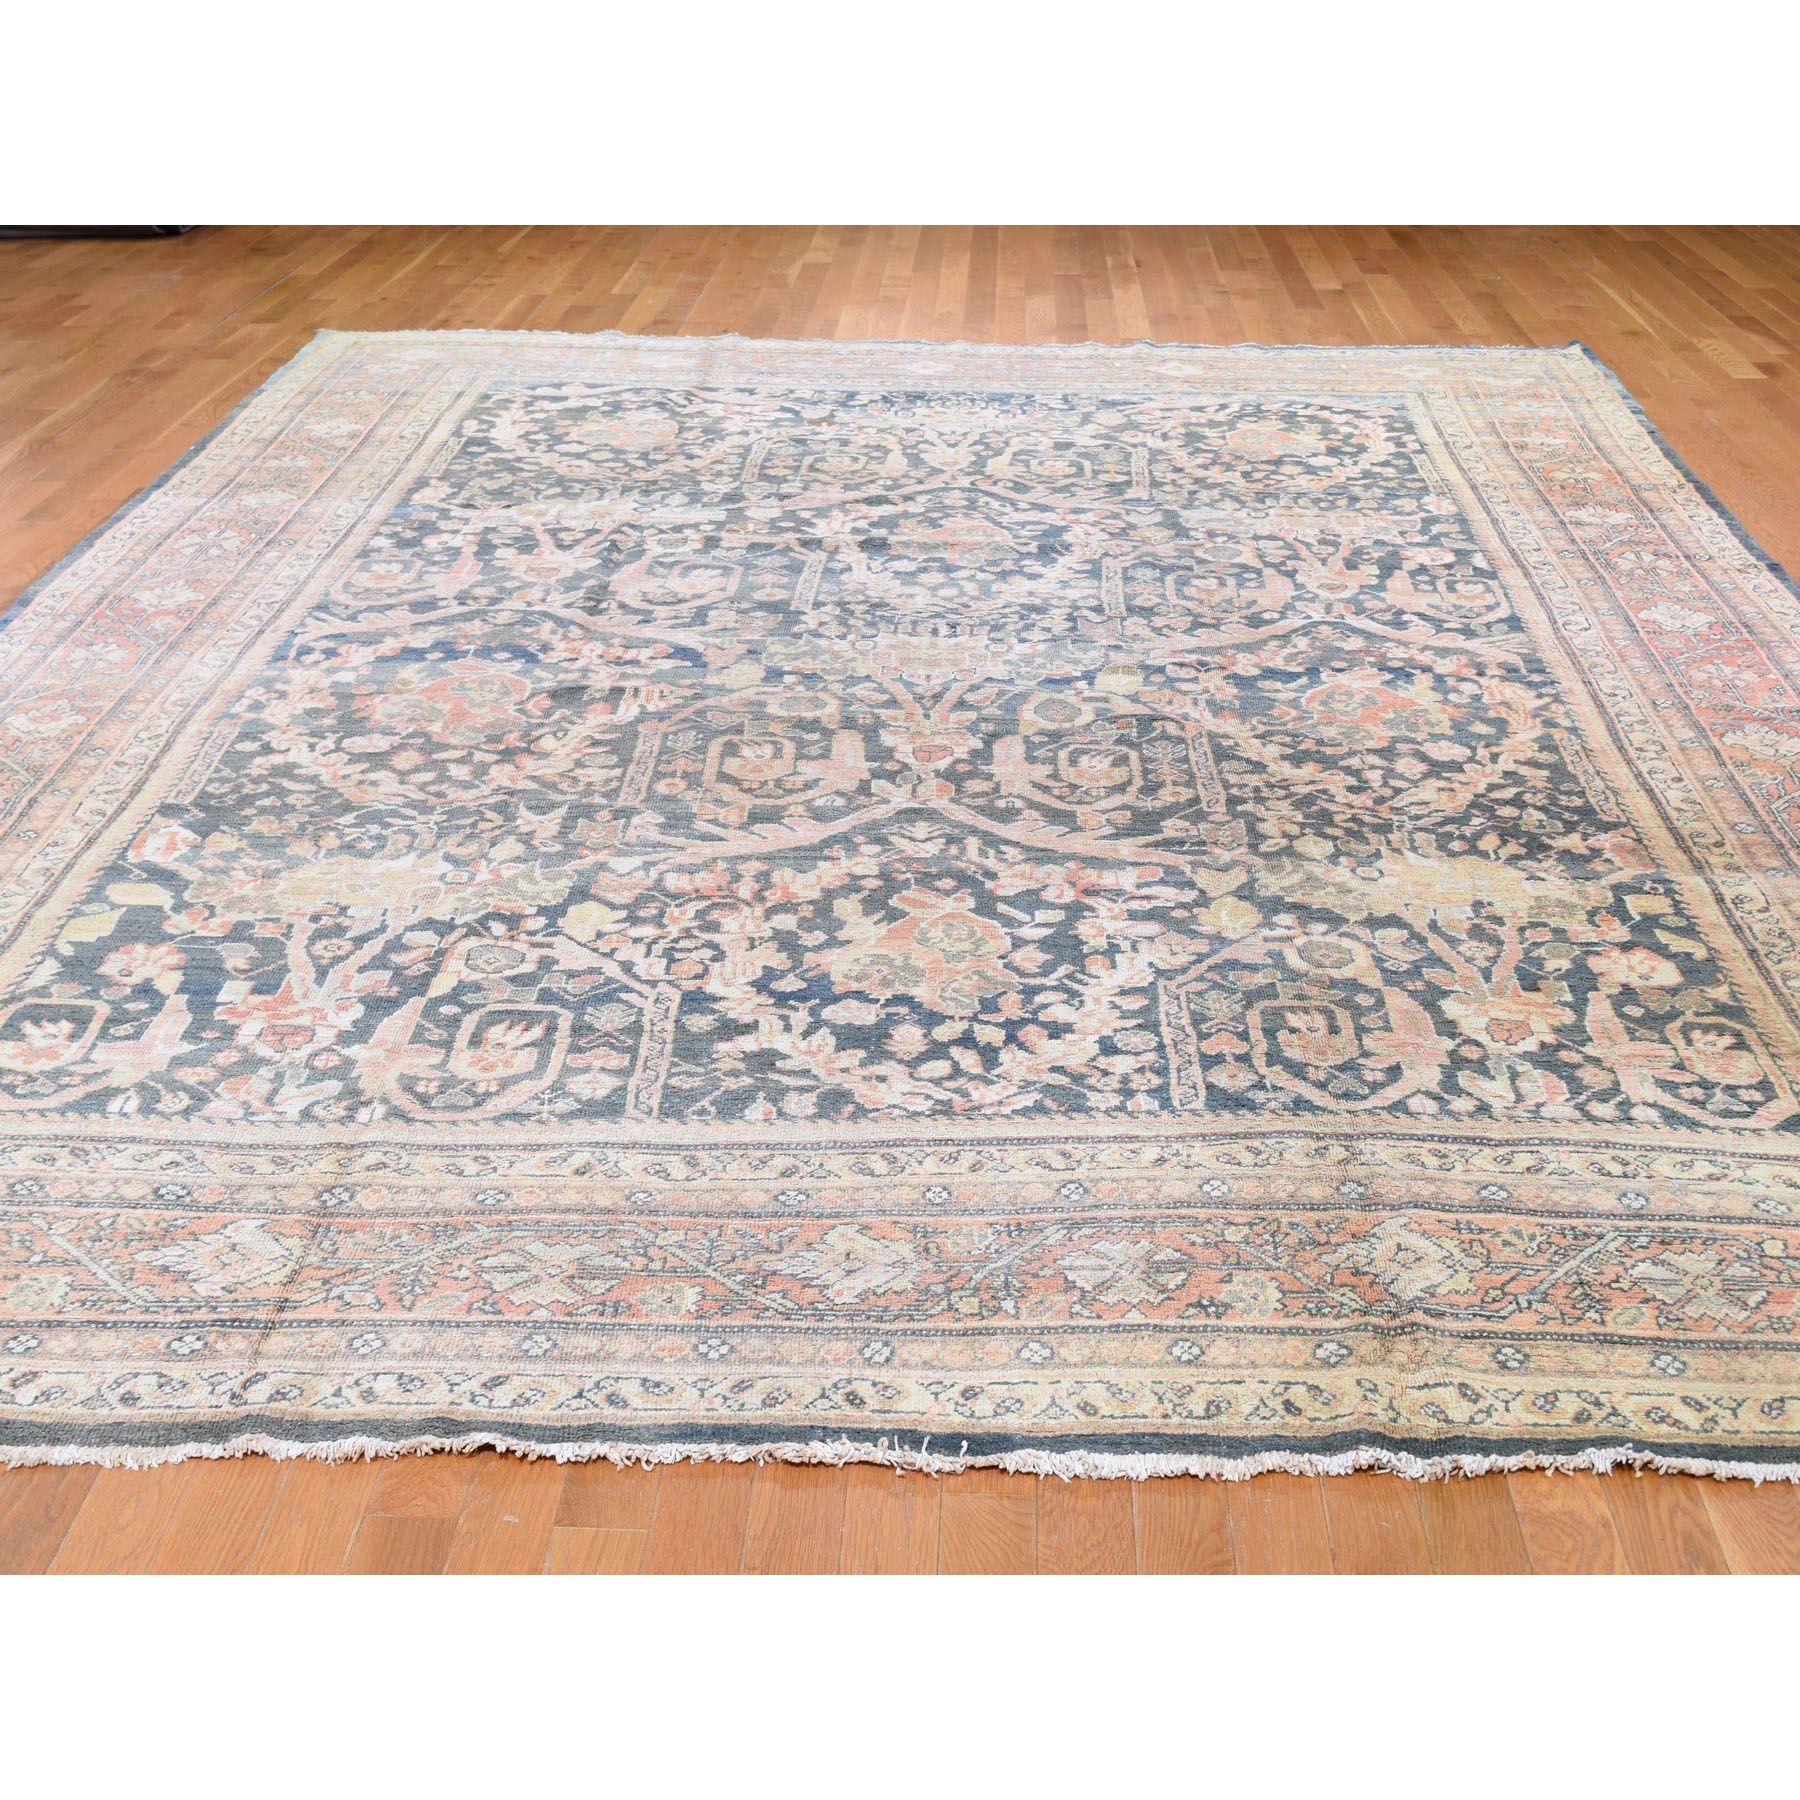 10-7 x13-6  Navy Antique Persian mahal Good Cond Pure Wool Hand Knotted Oriental Rug 